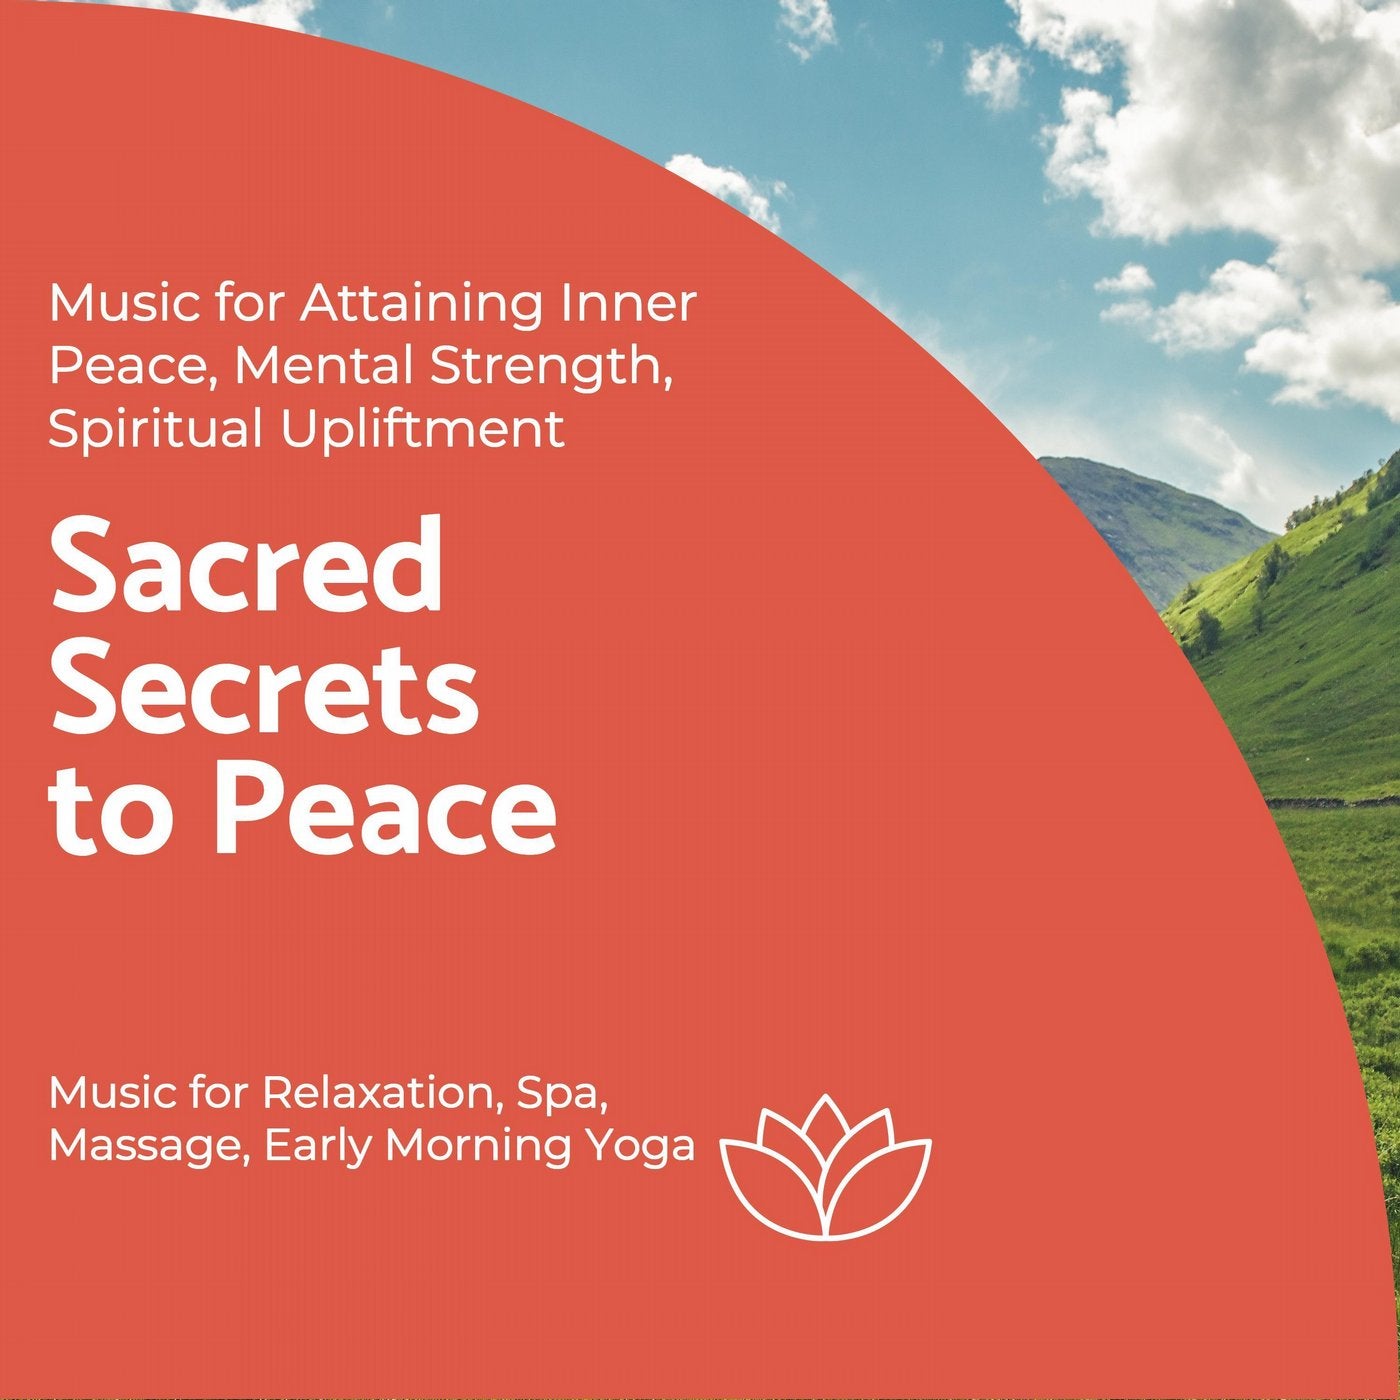 Sacred Secrets To Peace (Music For Attaining Inner Peace, Mental Strength, Spiritual Upliftment) (Music For Relaxation, Spa, Massage, Early Morning Yoga)